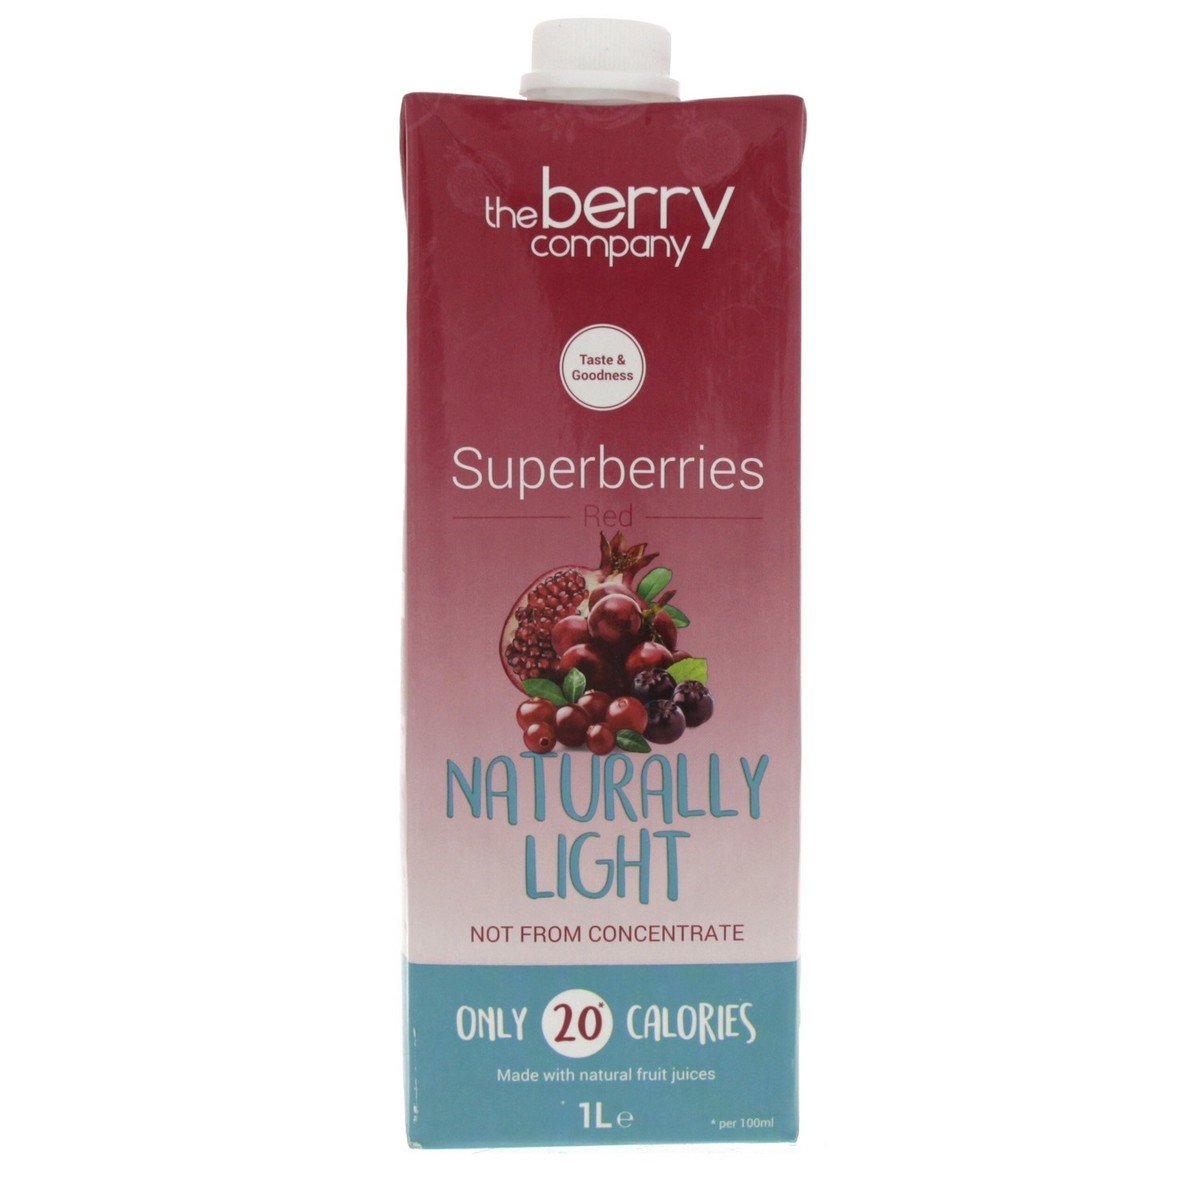 The Berry Company Superberries Red Naturally Light 1 Litre